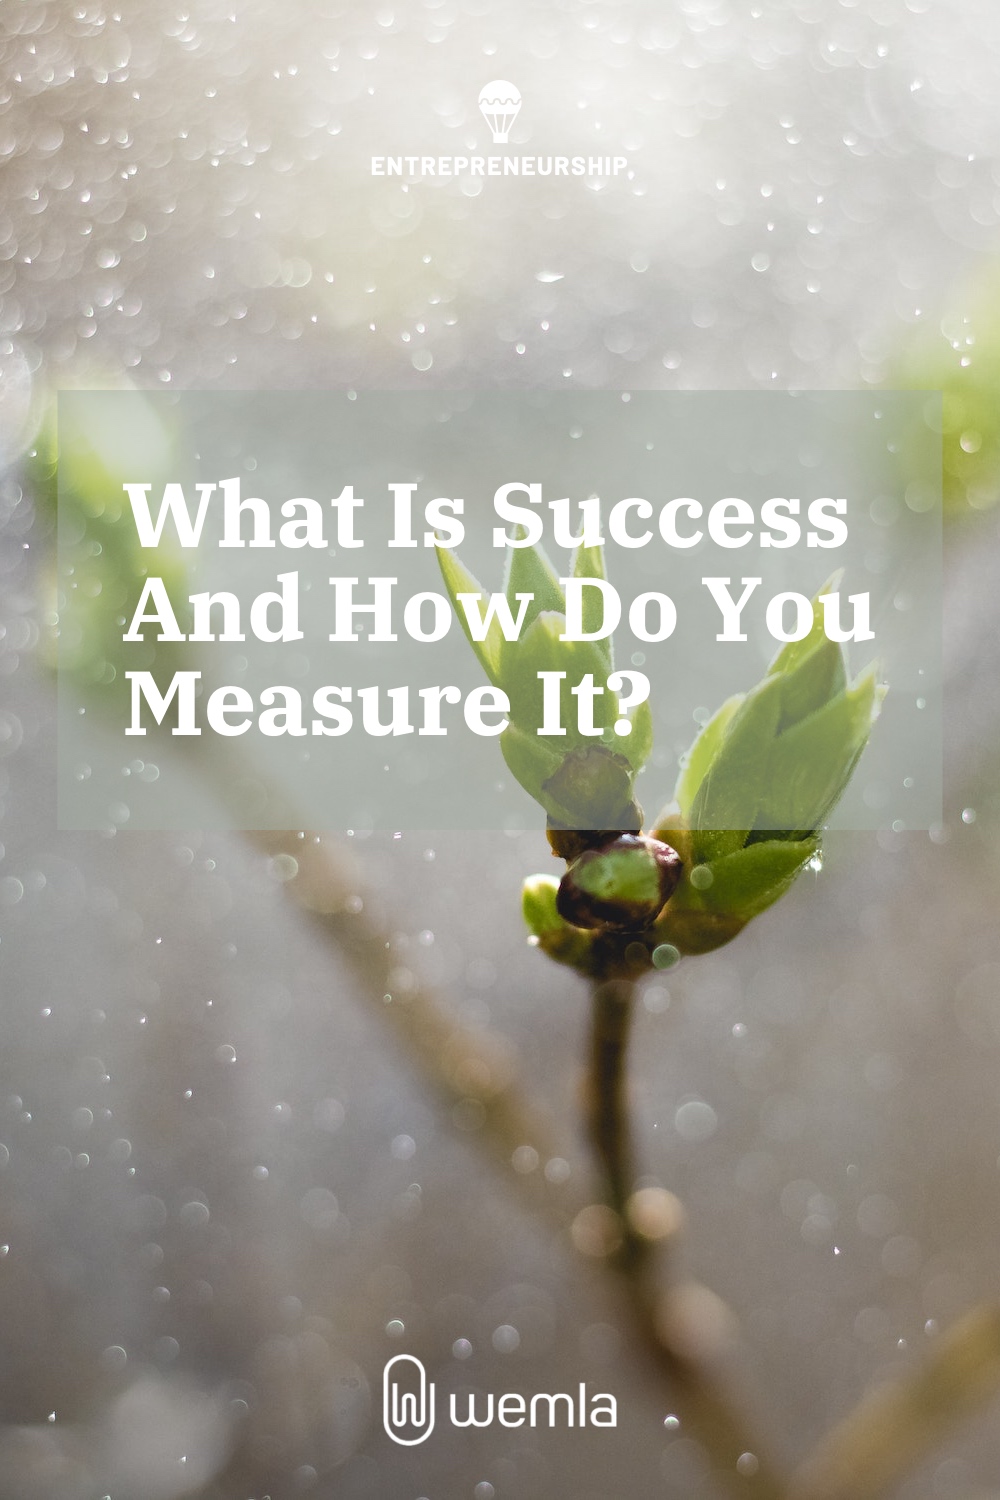 What Is Success And How Do You Measure It?